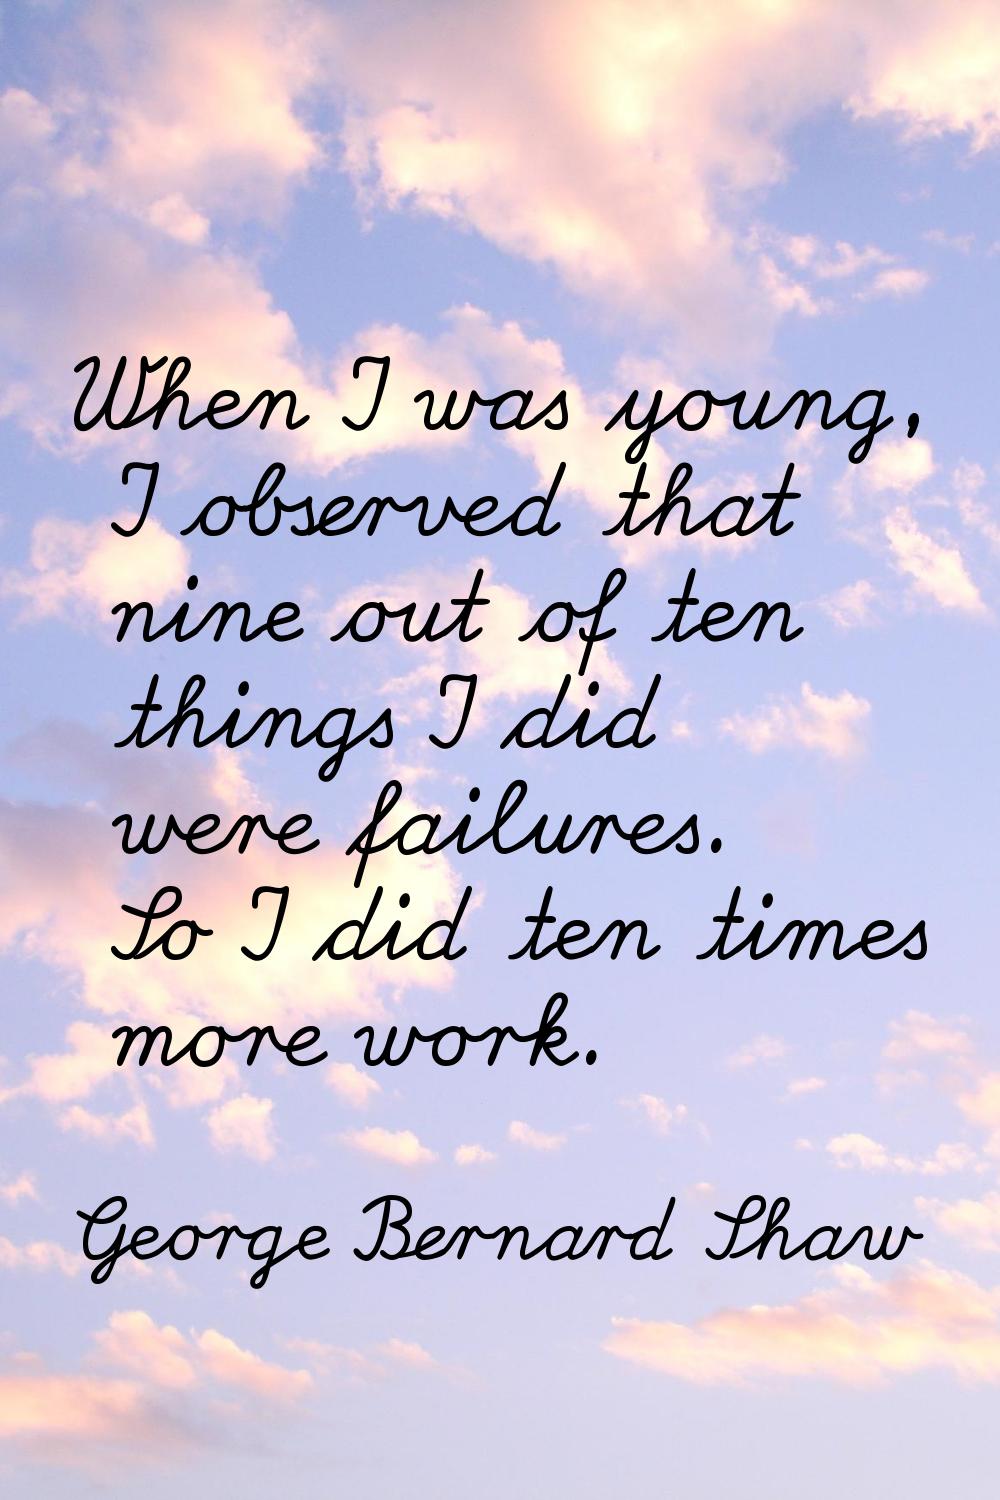 When I was young, I observed that nine out of ten things I did were failures. So I did ten times mo